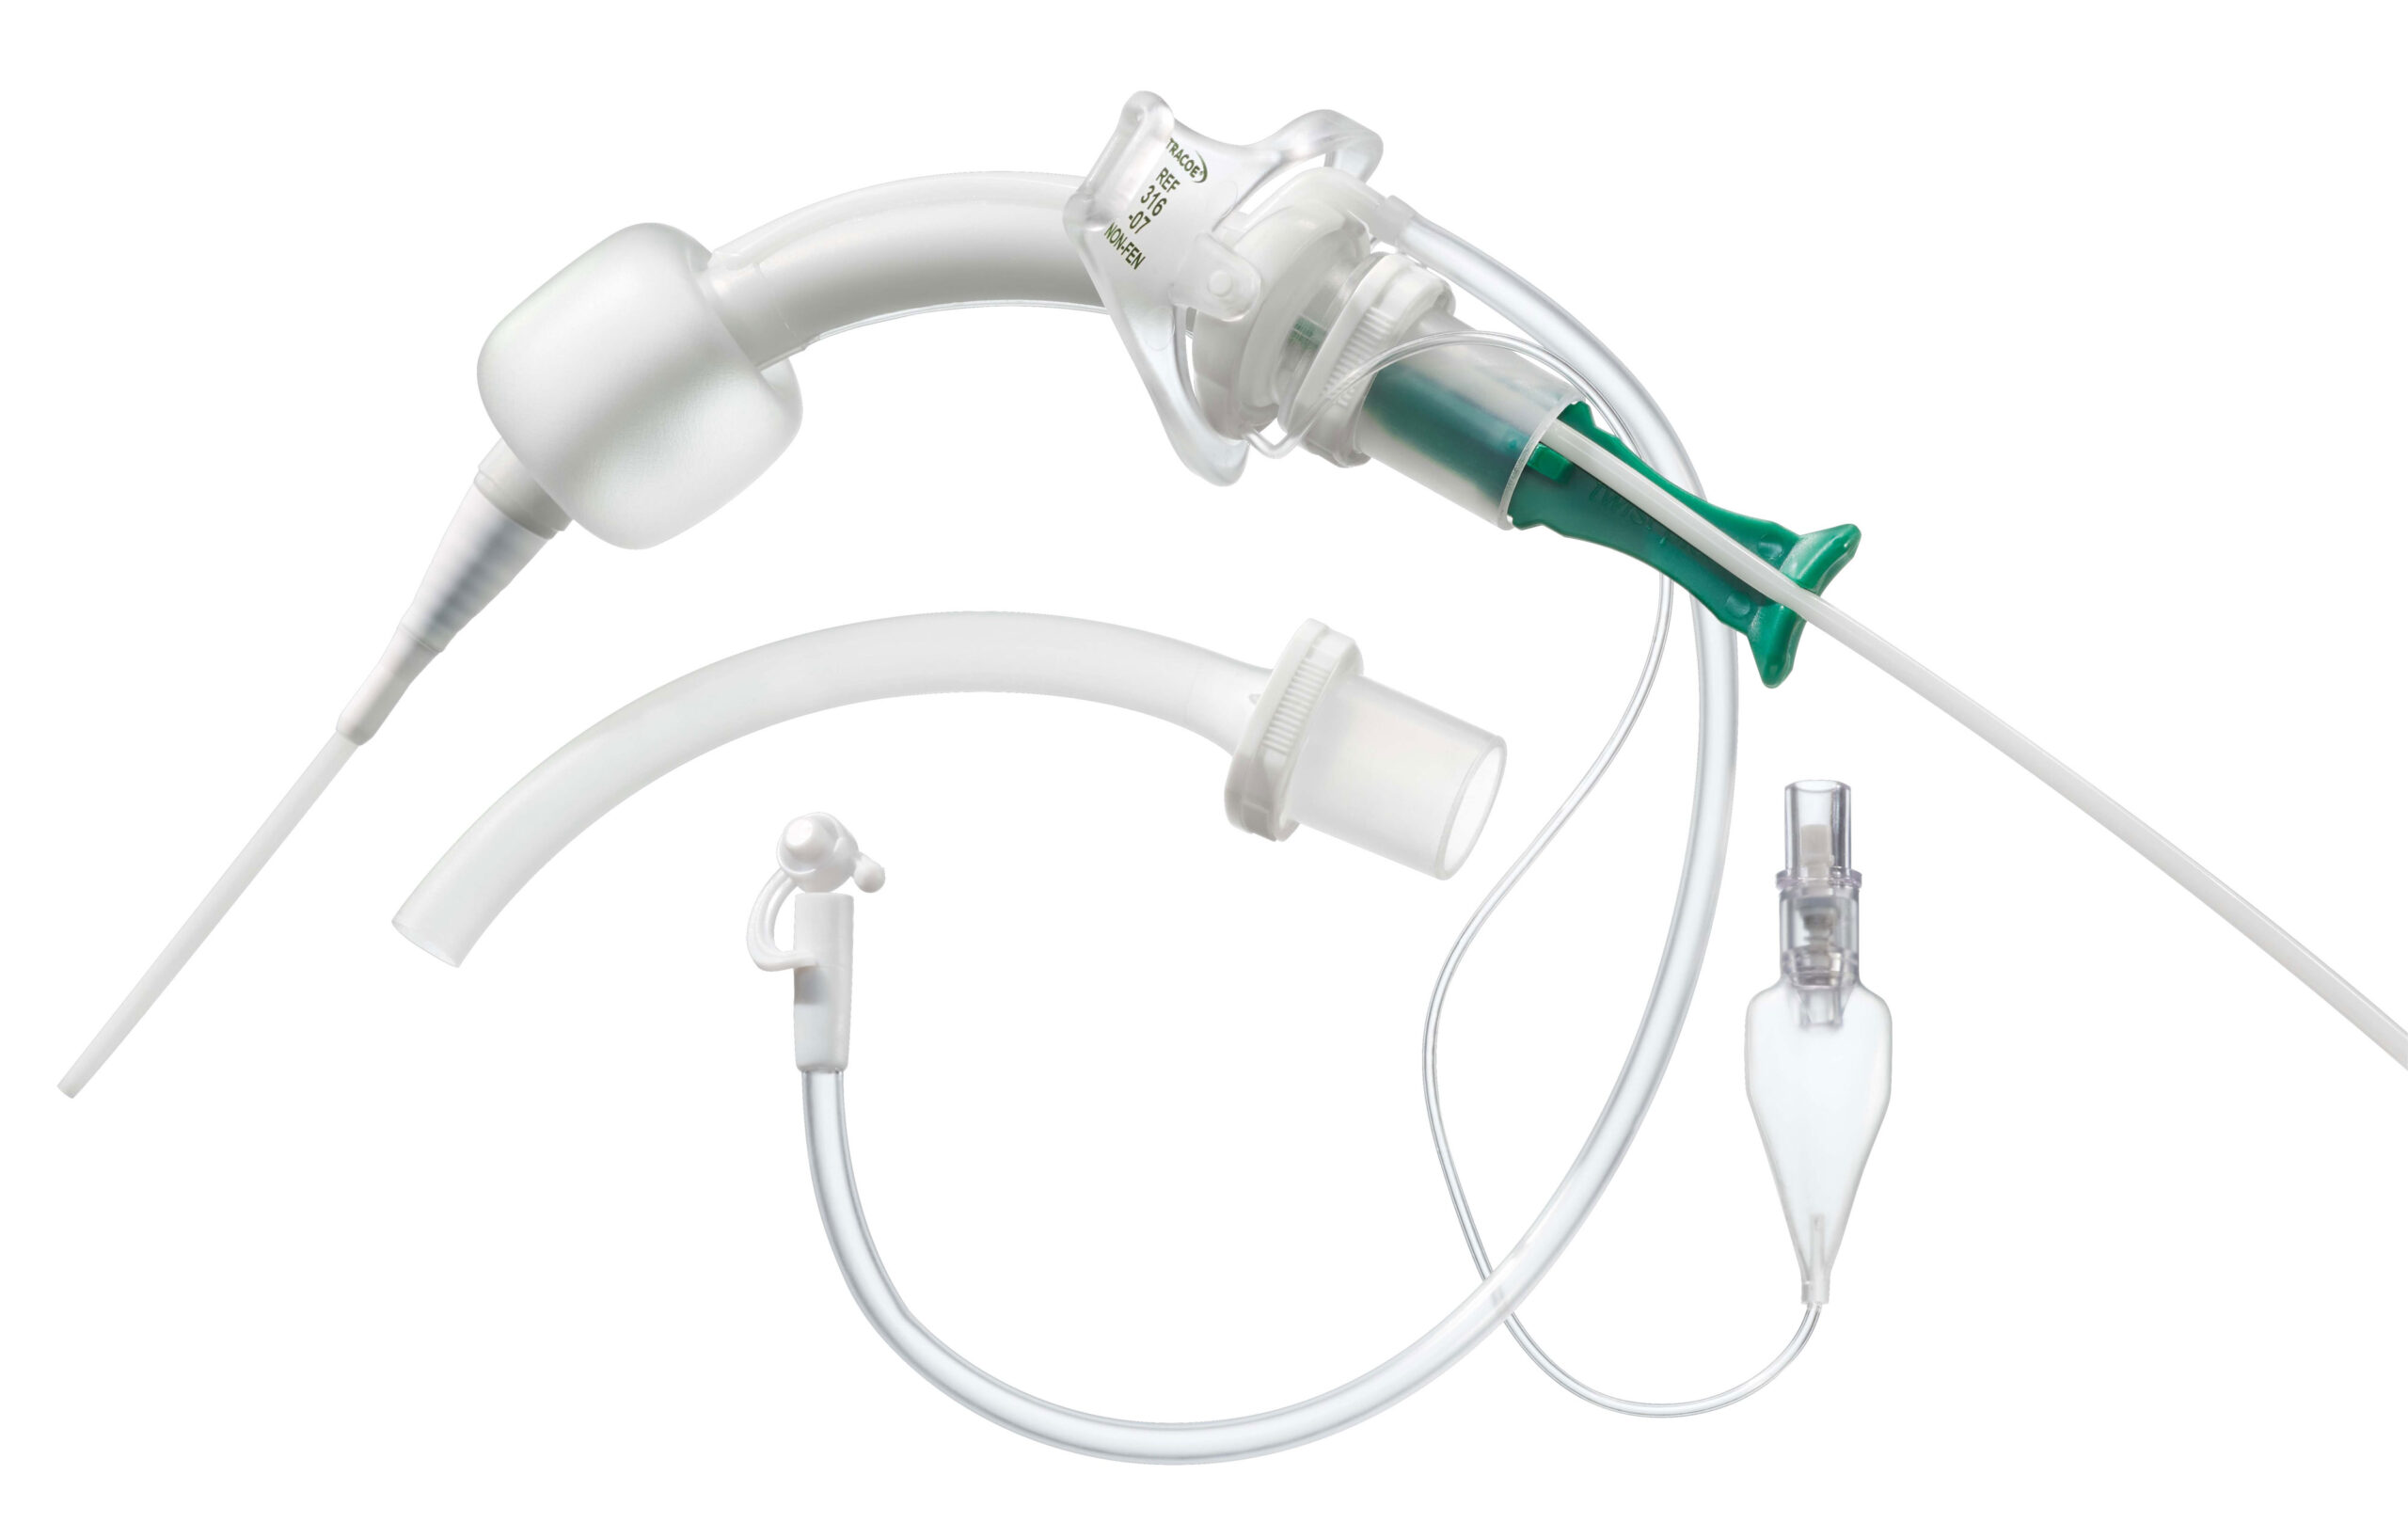 Dilation set + tracheostomy tube with low-pressure cuff, subglottic suction channel and minimally traumatic insertion system